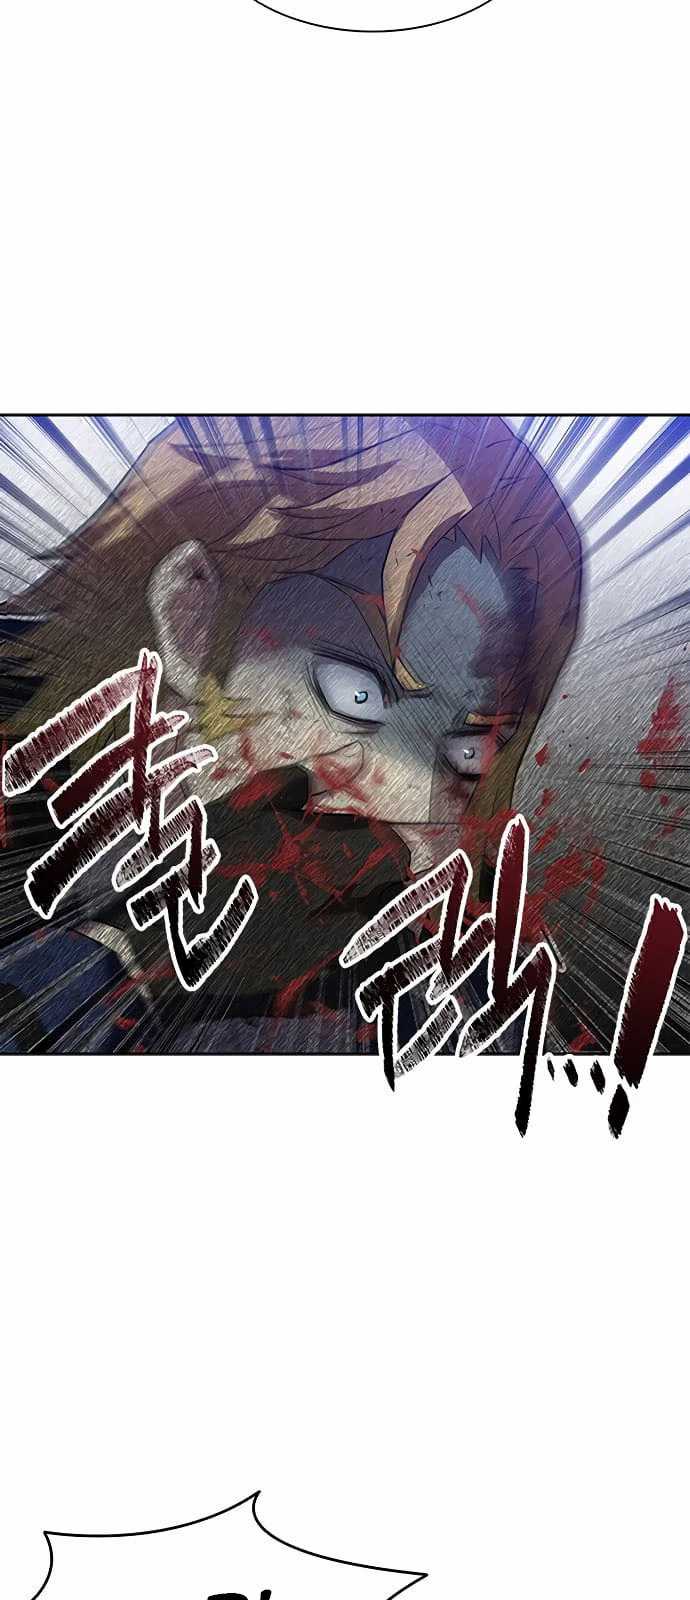 kill-to-villain Chapter chapter-01